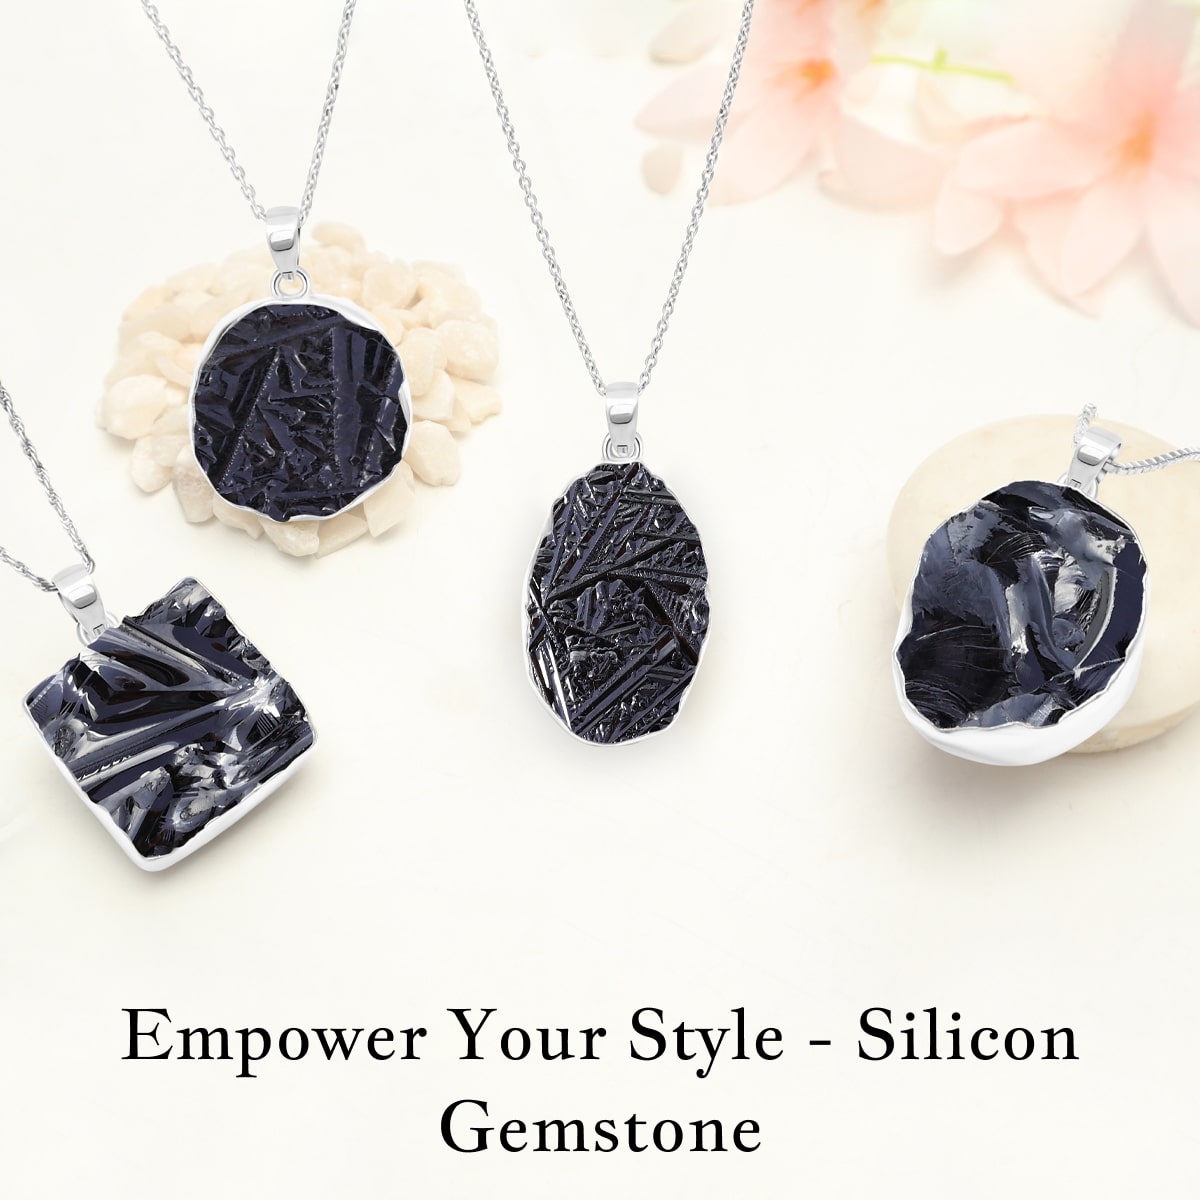 Commercial Use of Silicon Gemstone